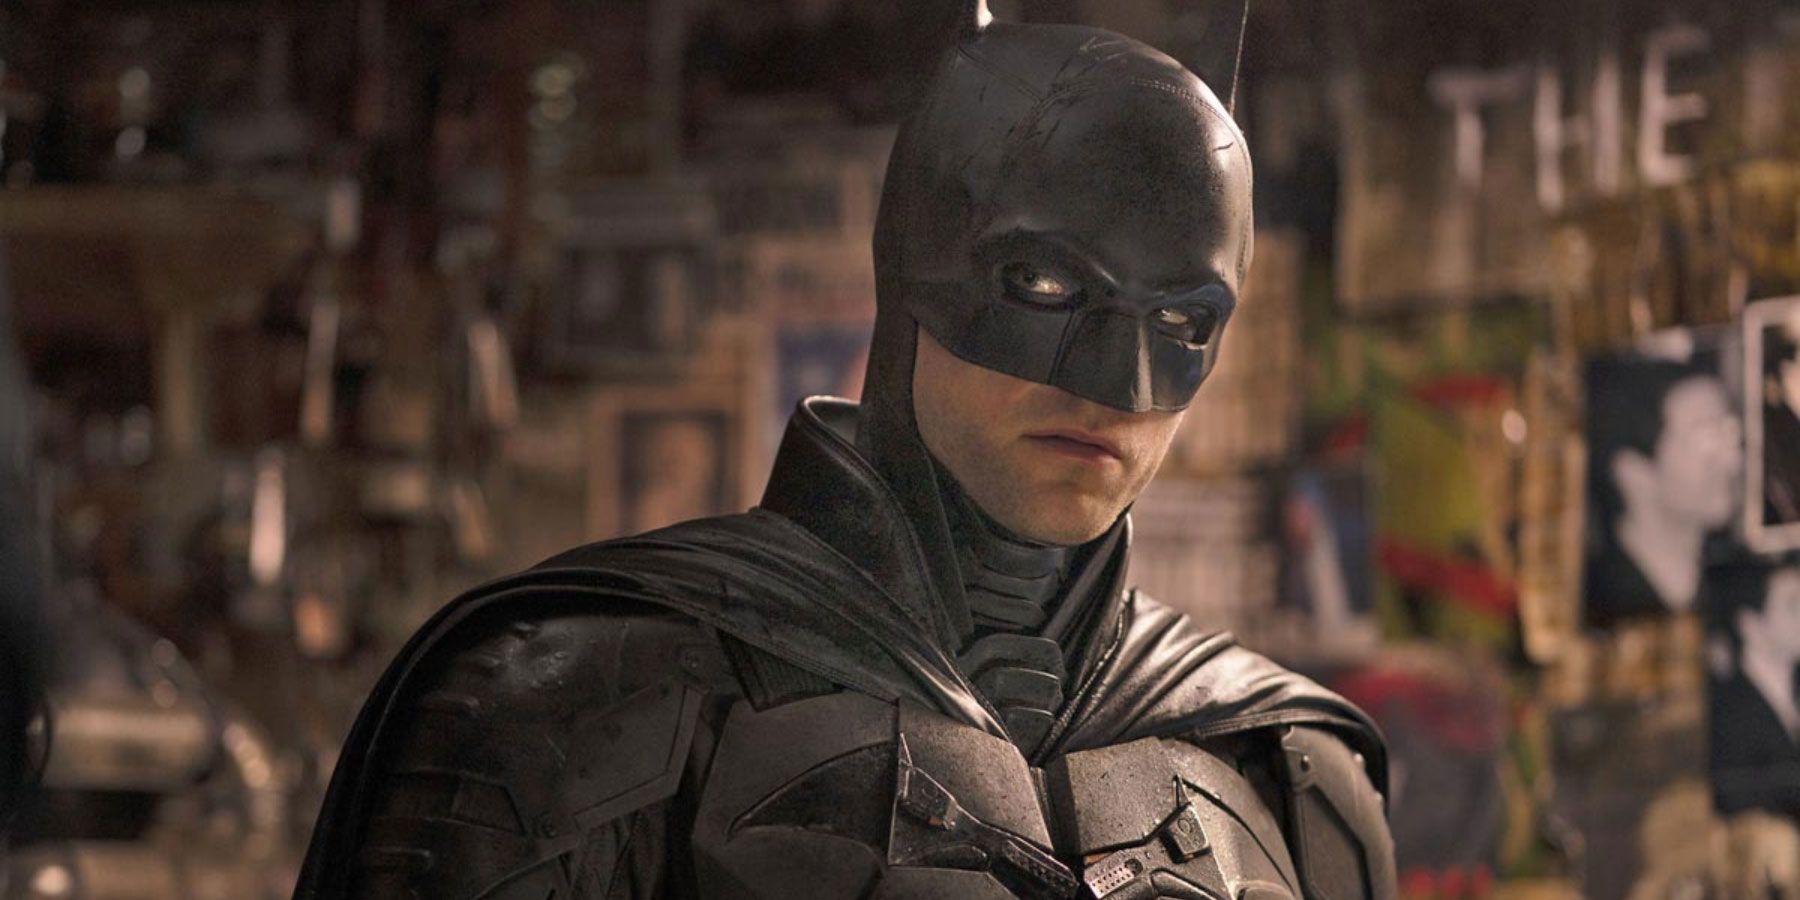 Robert Pattinson May Appear in Penguin's Show, but Not as Batman